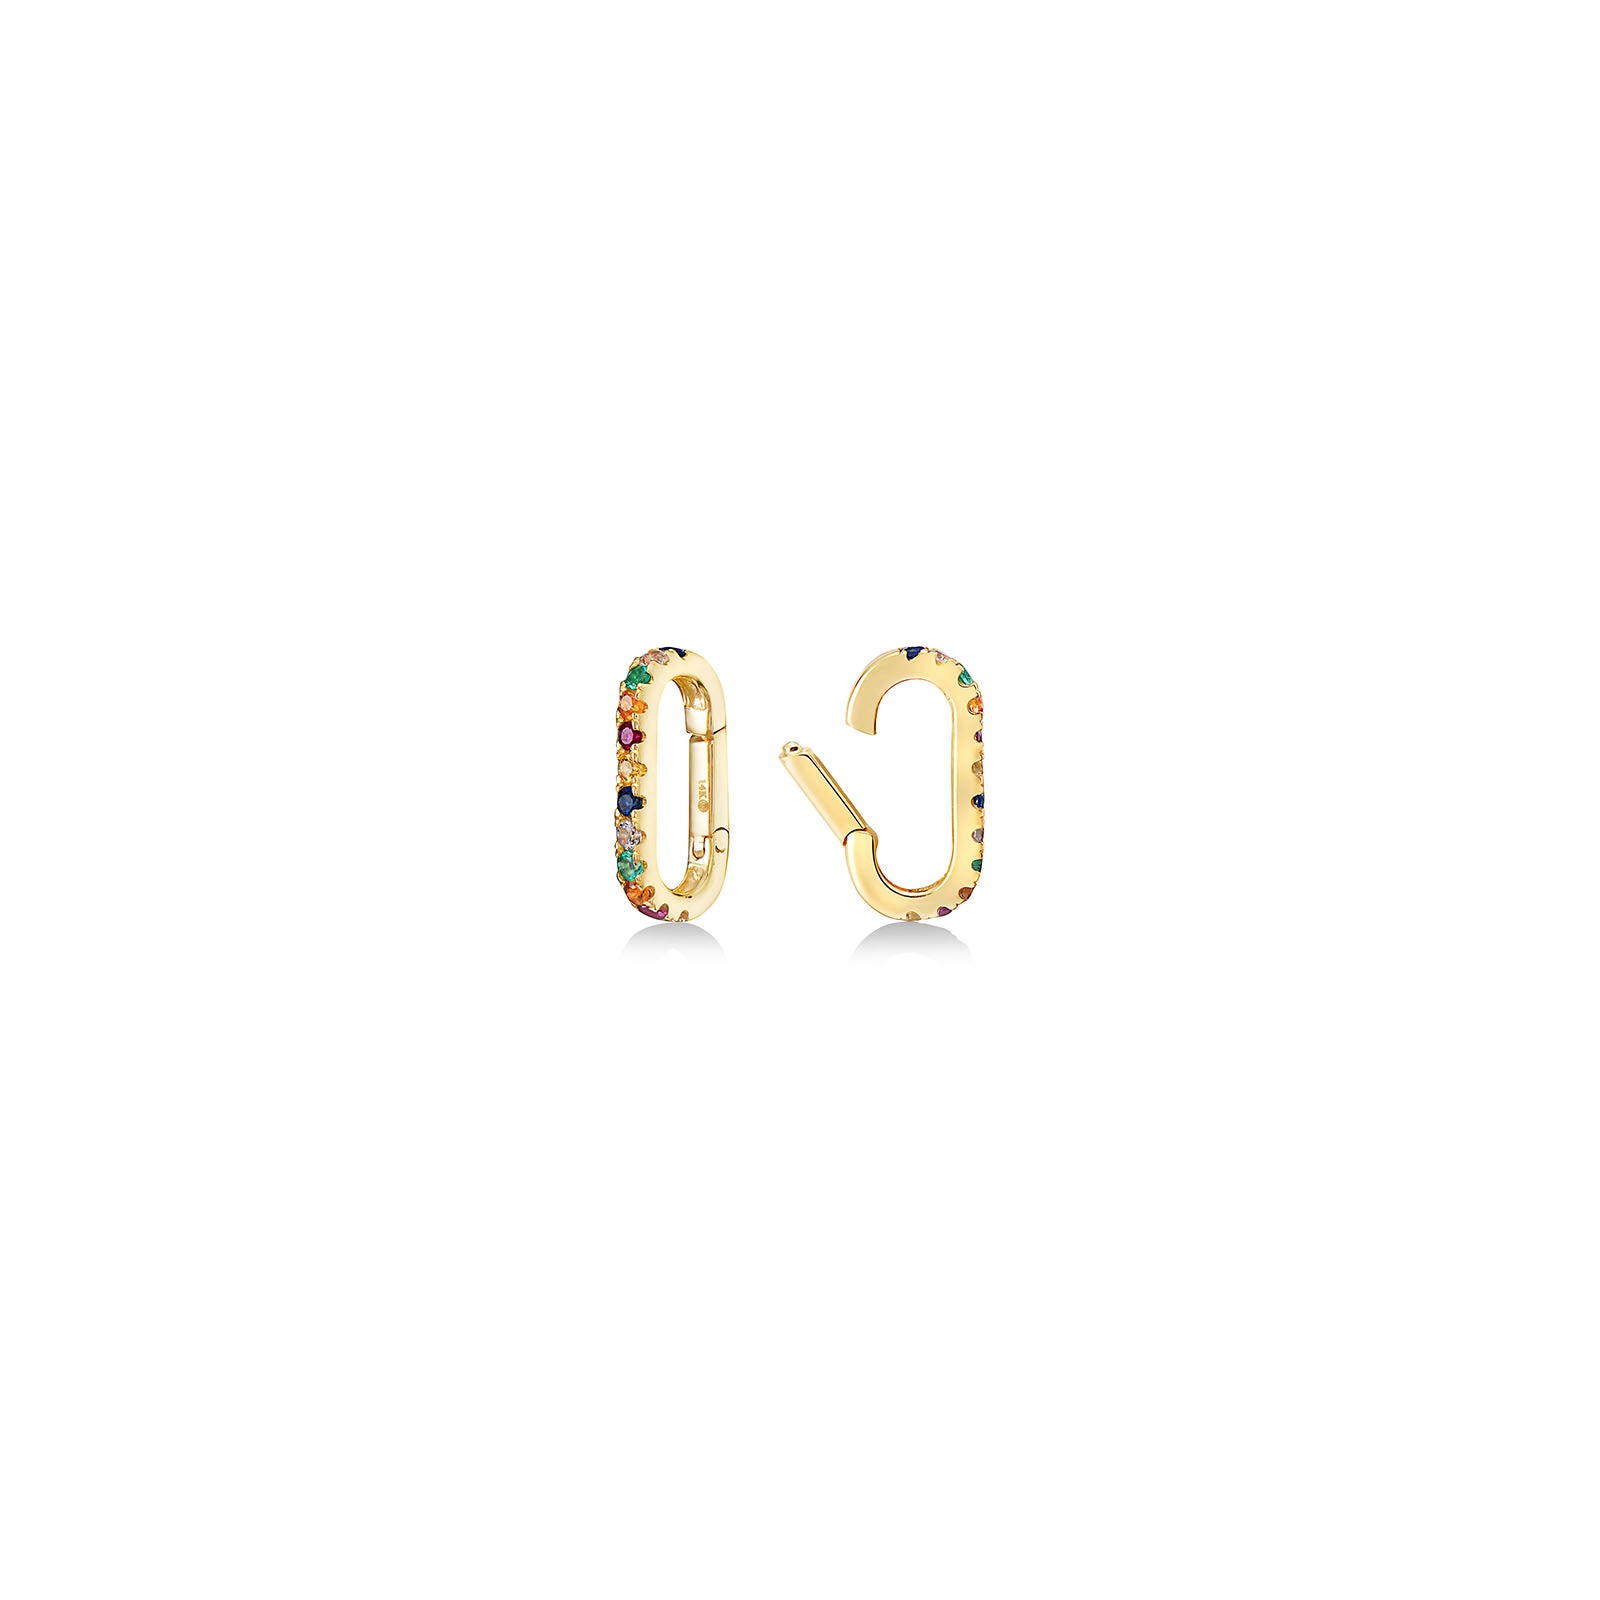 14k yellow gold small oval locking charm with rainbow colored stones.